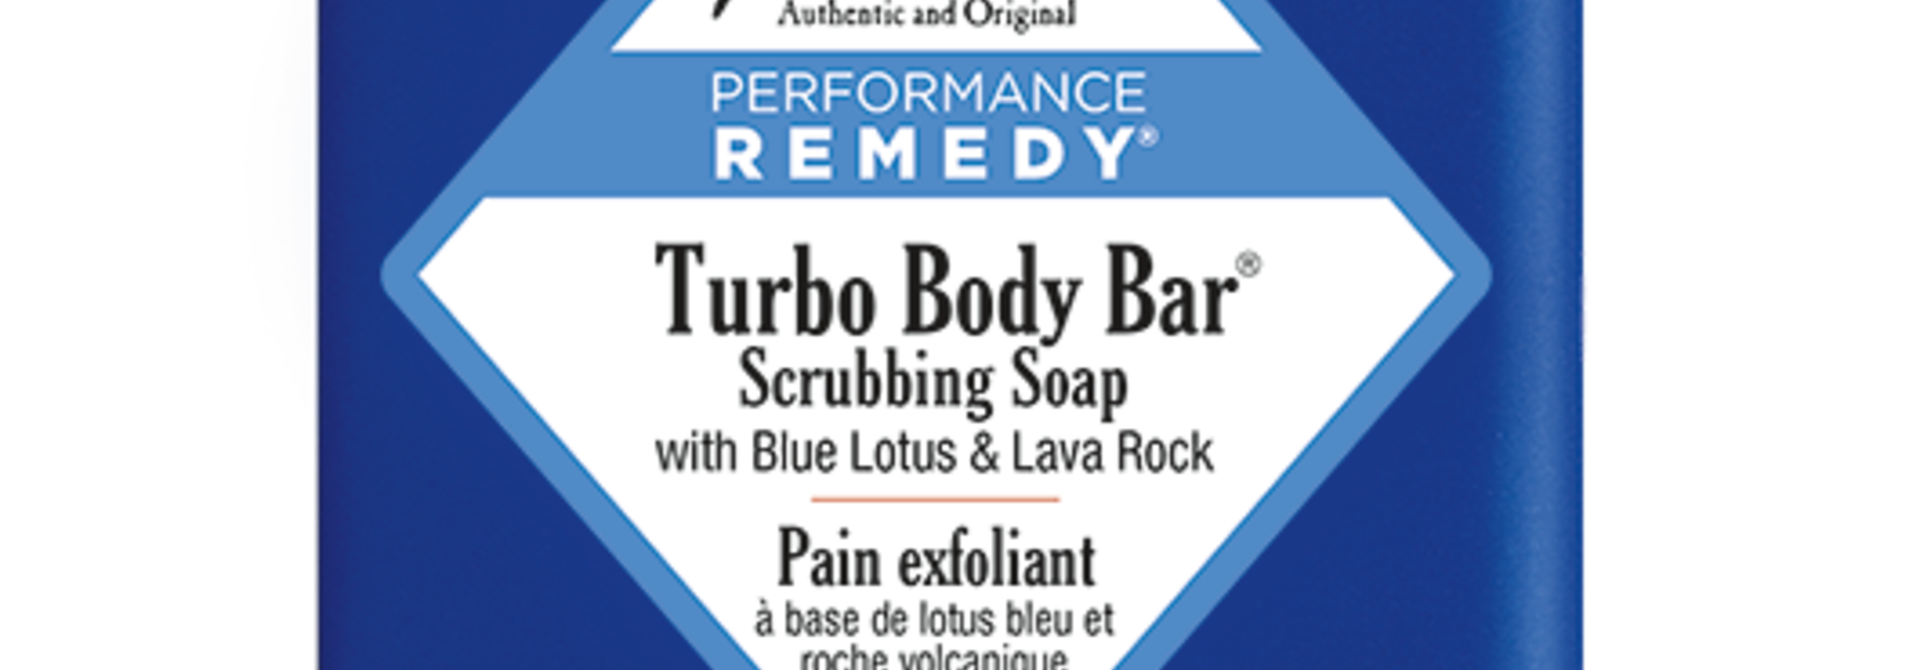 Turbo Body Bar Scrubbing Soap | The Performance Ready Collection